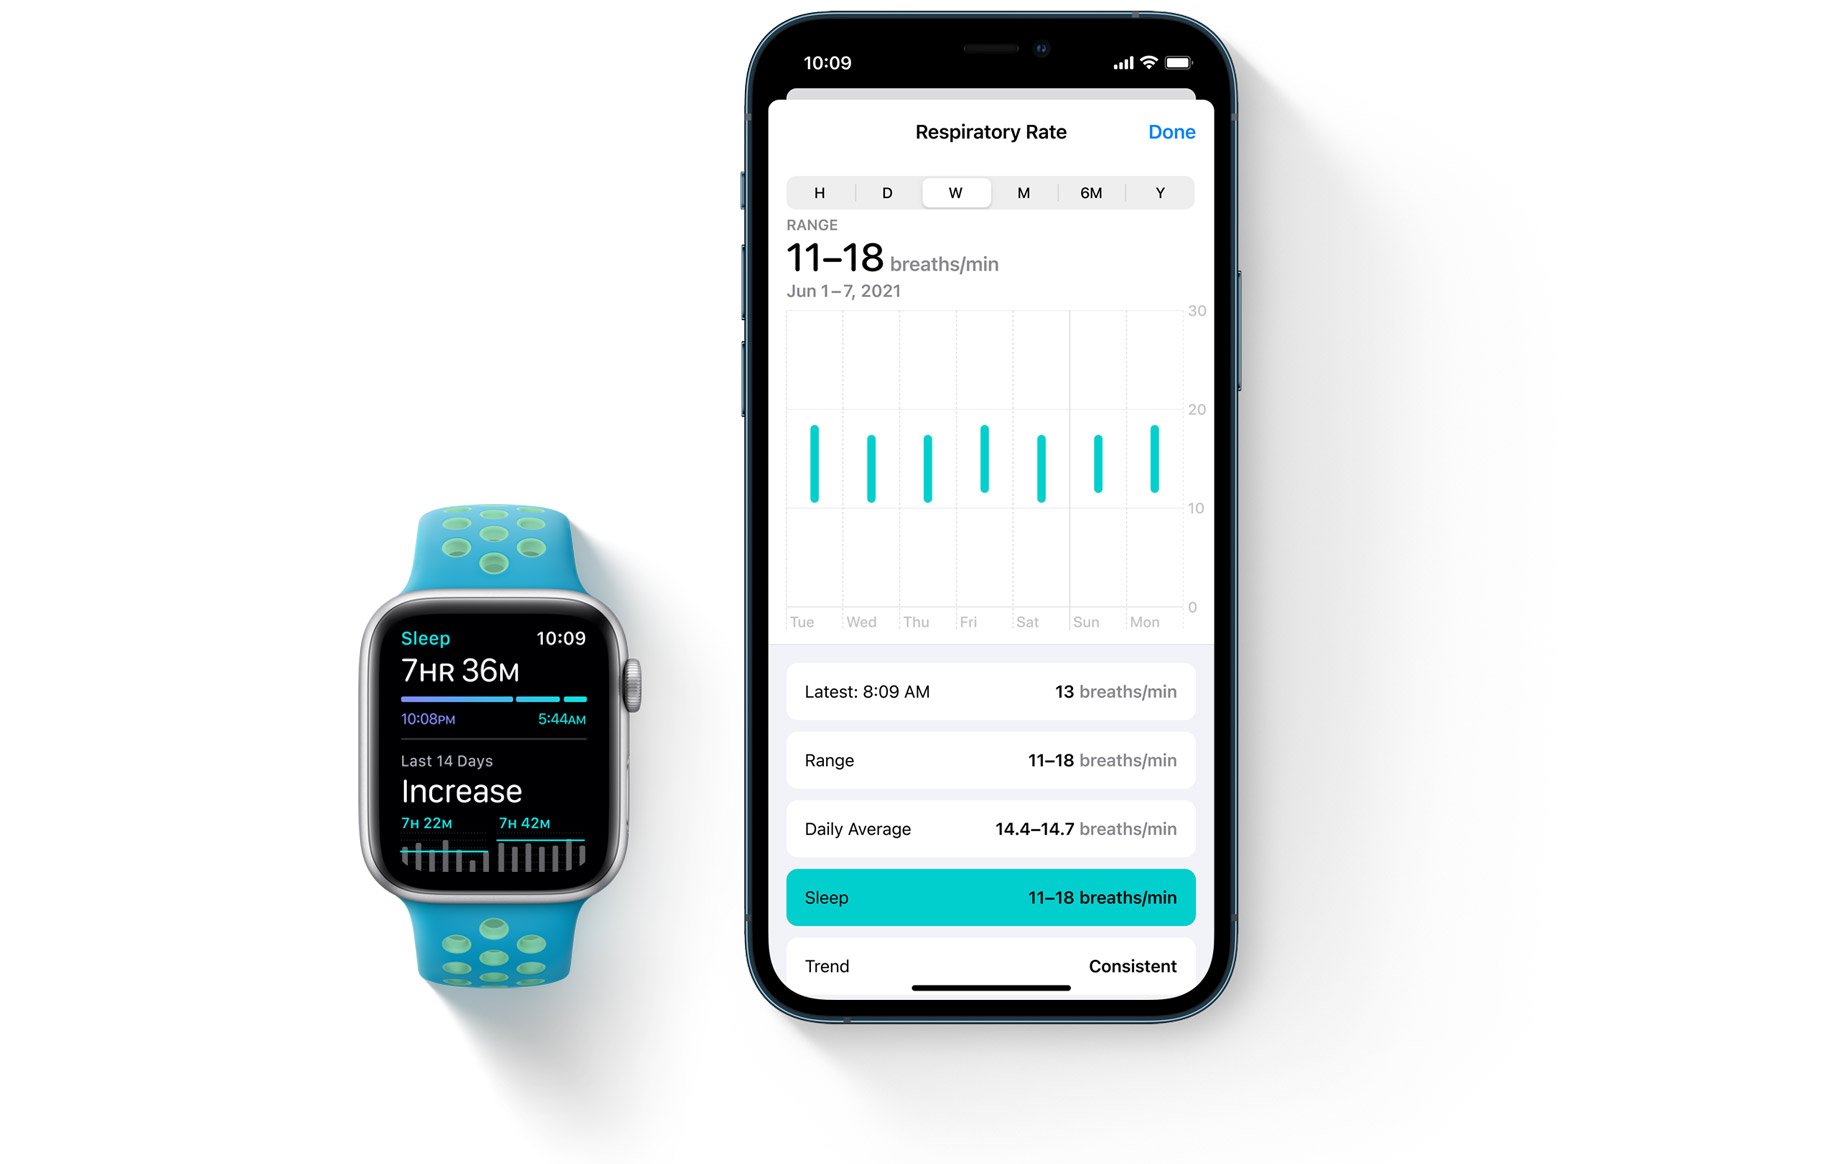 Sleep Respiatory Rate in watchOS 8 and iOS 15